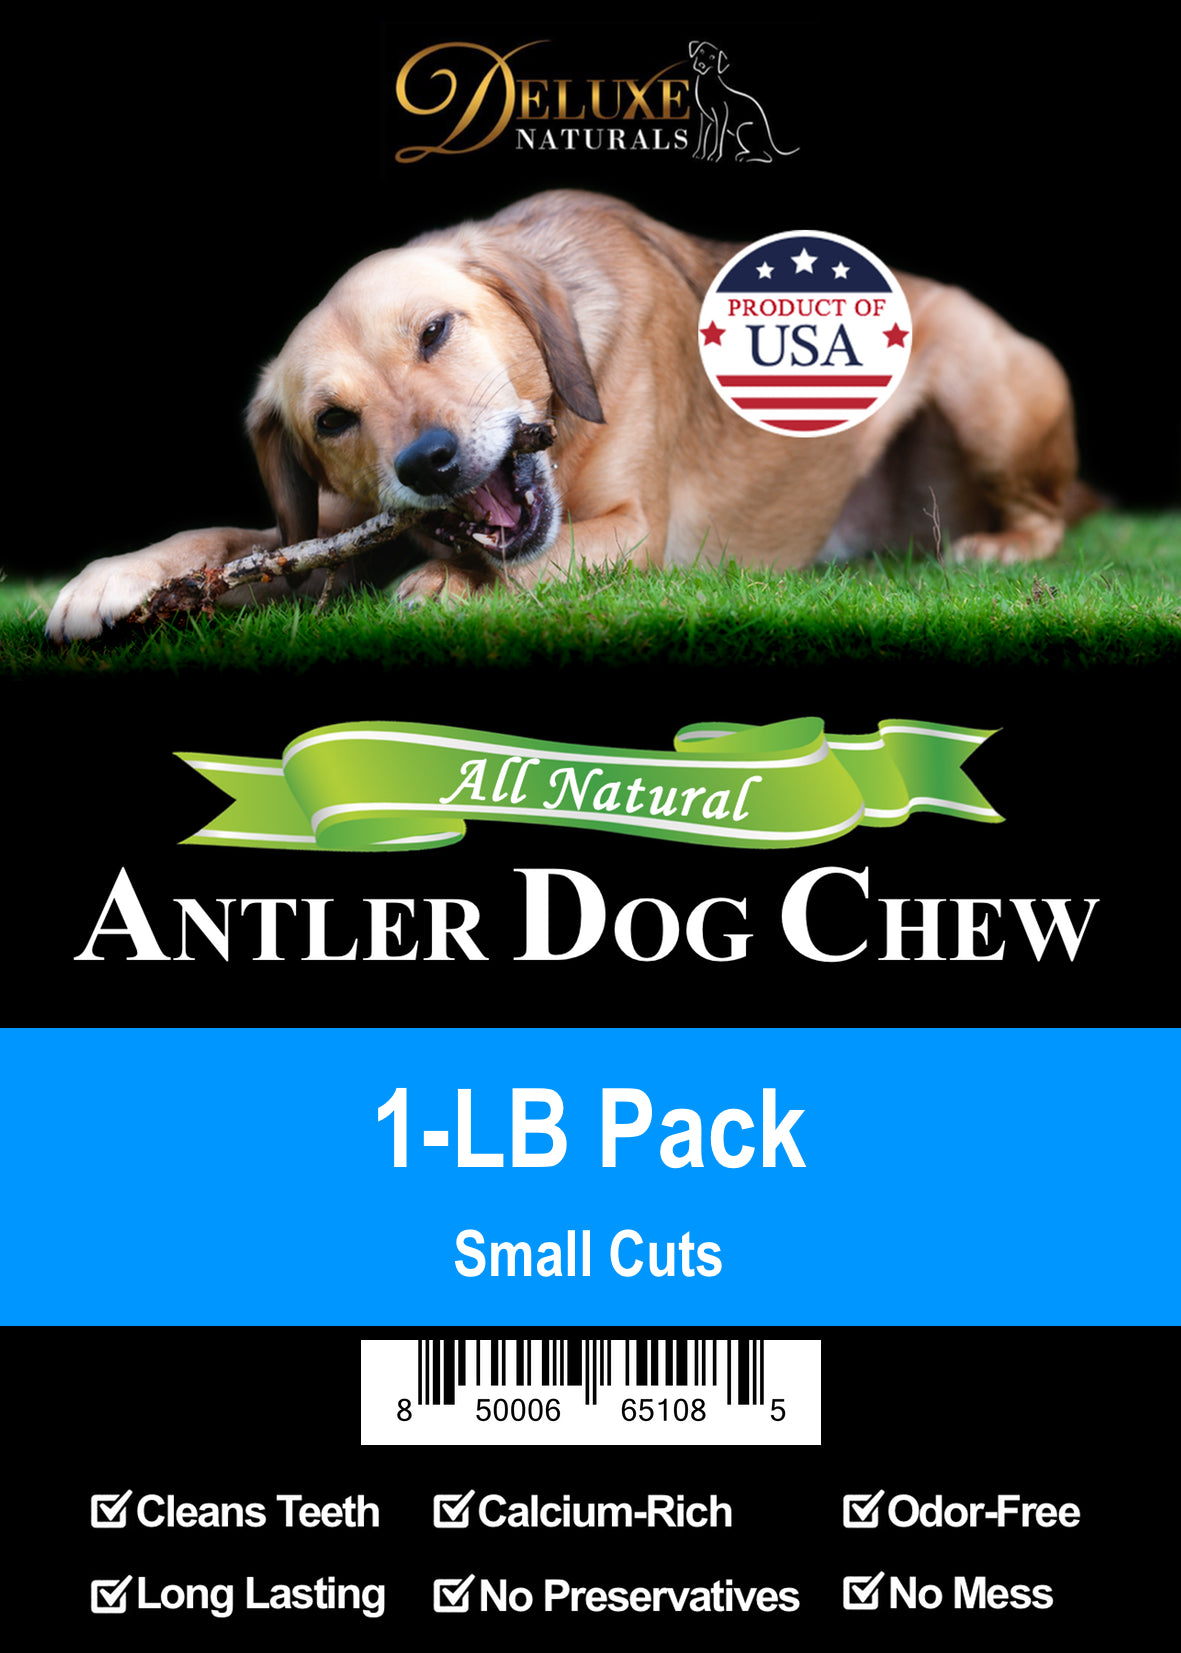 Deluxe Naturals 1-LB Pack Elk Antler Dog Chew - Mixed Small Cuts